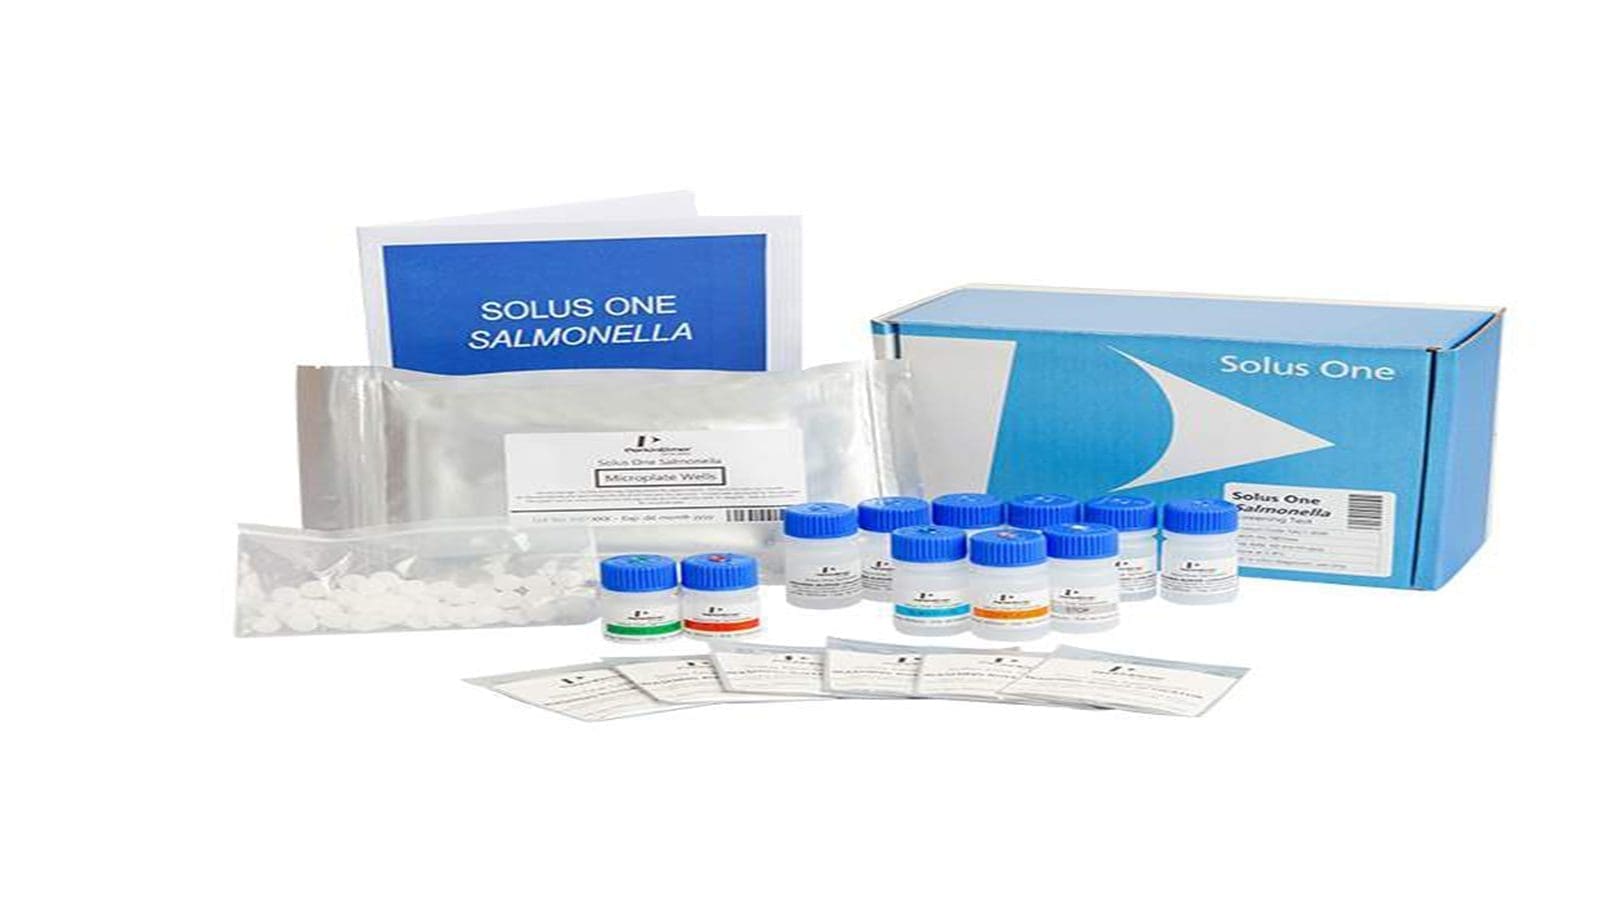 PerkinElmer launches pet food testing extension to its Solus One Salmonella test kit